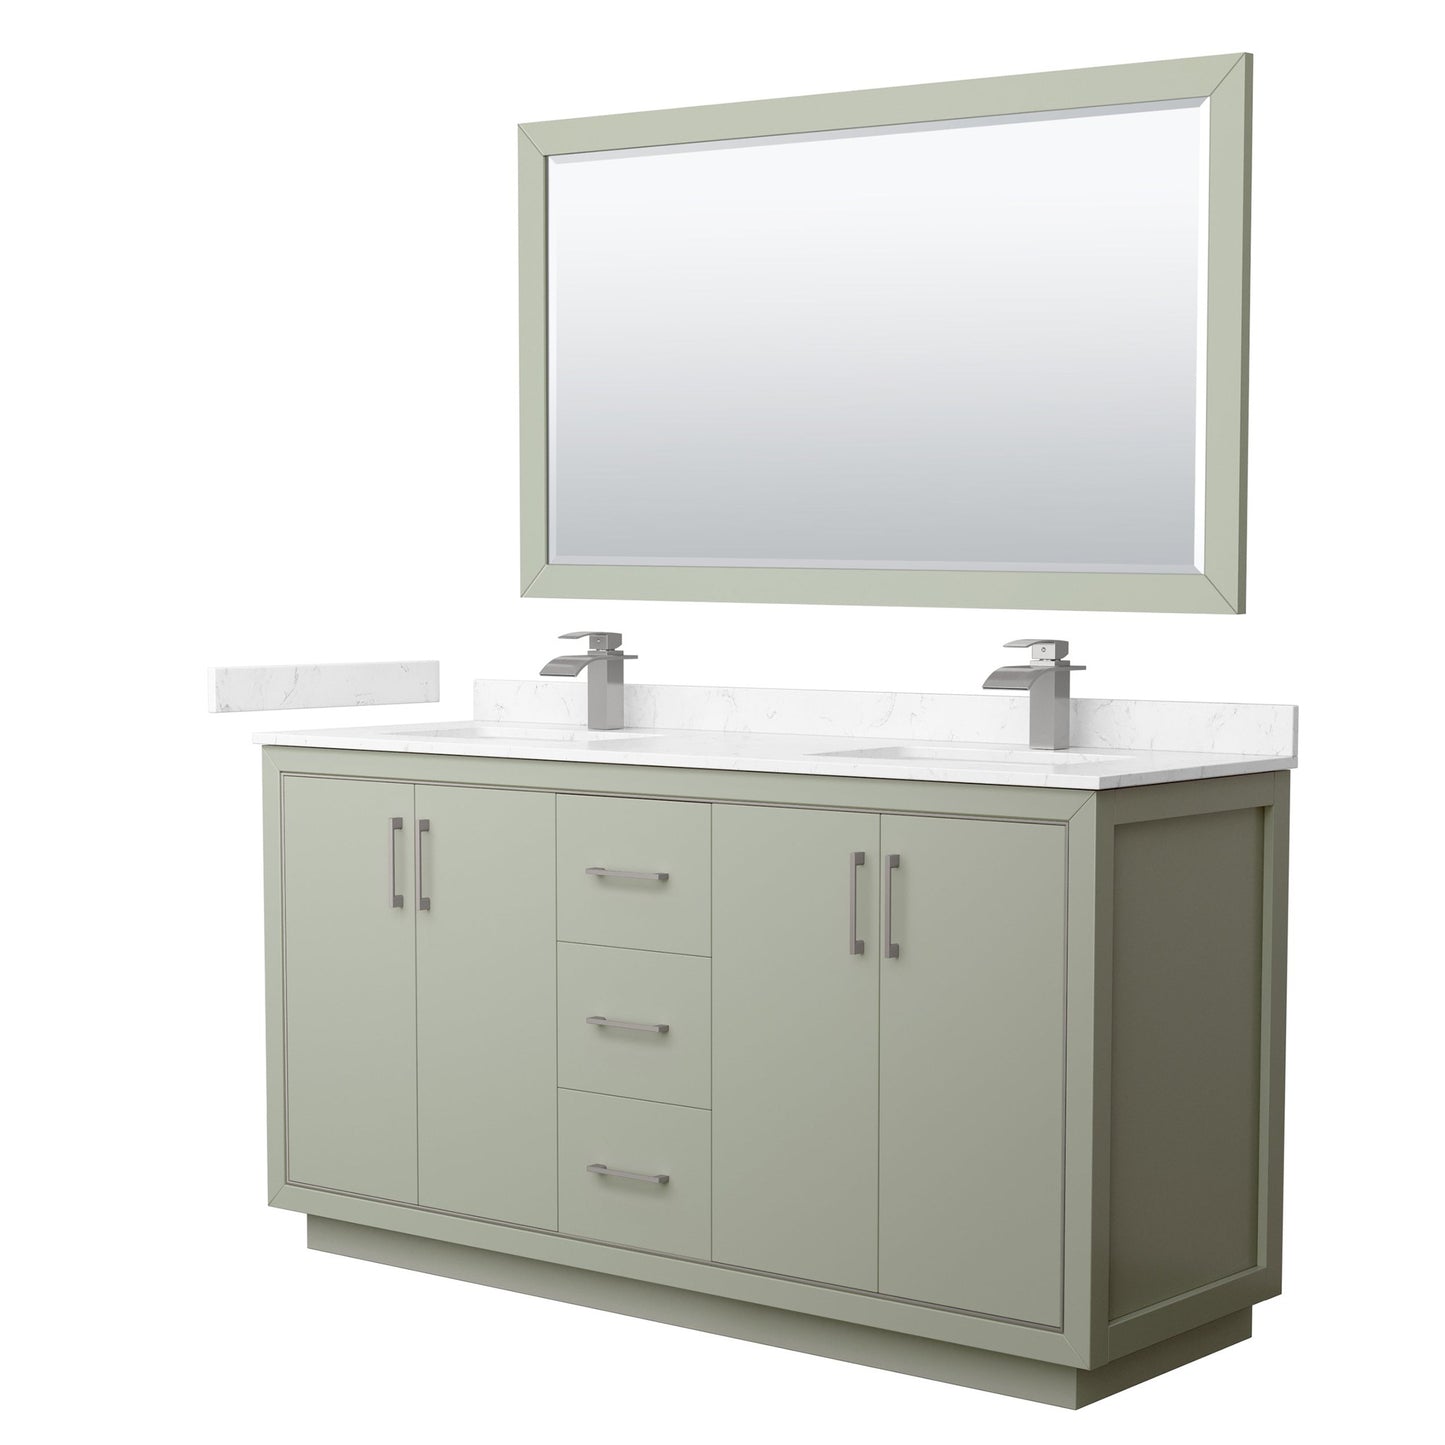 Wyndham Collection Icon 66" Double Bathroom Vanity in Light Green, Carrara Cultured Marble Countertop, Undermount Square Sinks, Brushed Nickel Trim, 58" Mirror